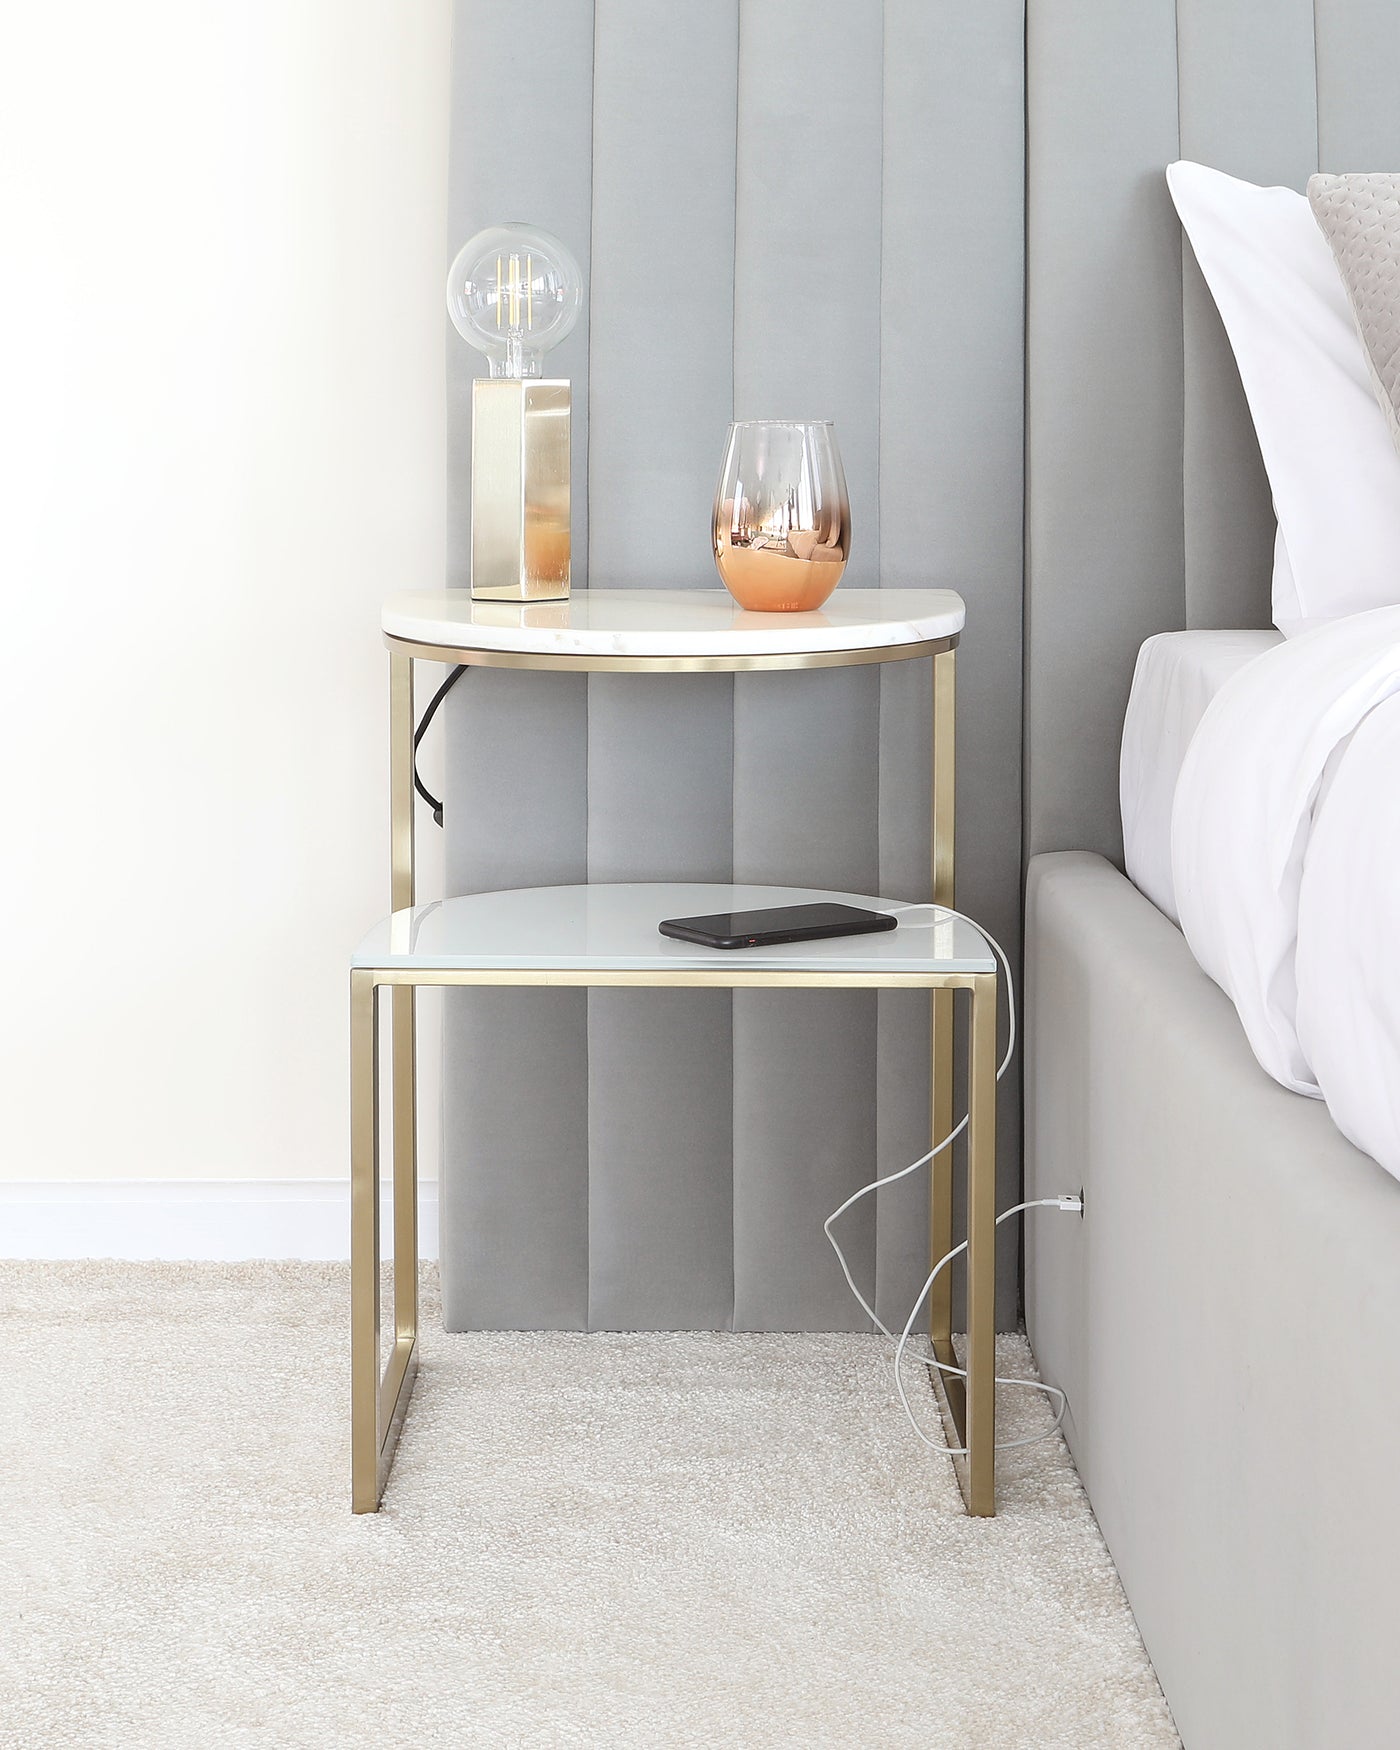 A modern two-tiered round side table with a white marble top and gold-finished metal frame, positioned next to a bed with grey padded headboard on a textured beige carpet. The upper tier supports a decorative lamp and a stemless wine glass, while the lower tier holds a smartphone with a charging cable.